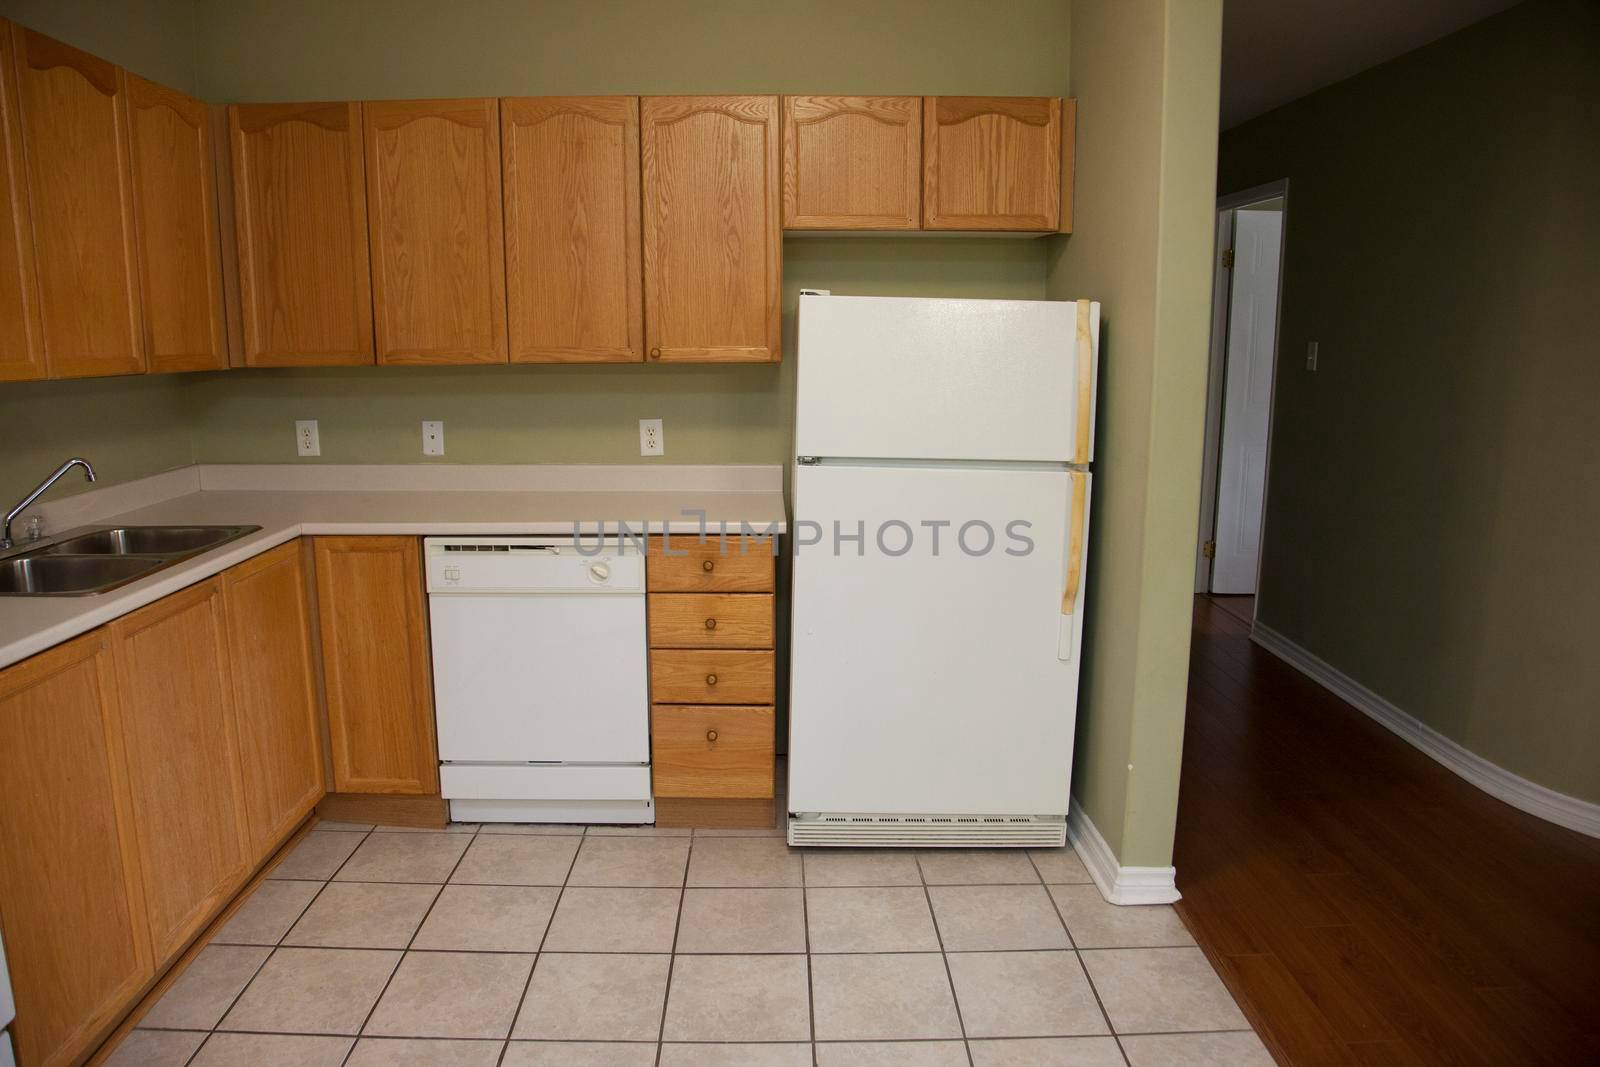 Looking at a small kitchen fridge, cupboards and long hallway 